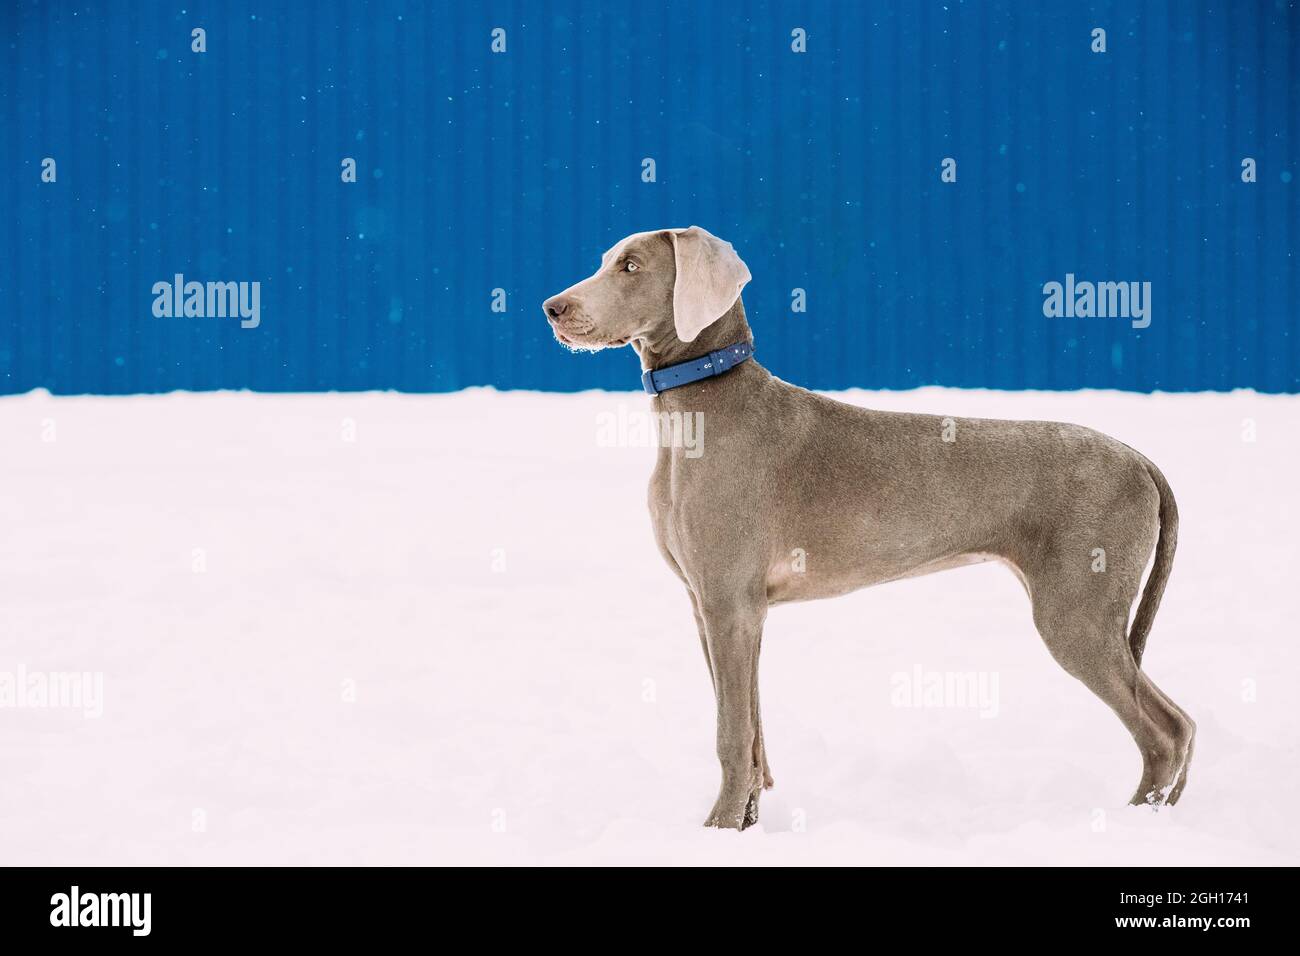 Beautiful Weimaraner Dog Standing In Snow At Winter Day. Large Dog Breds For Hunting. Weimaraner Is An All-purpose Gun Dog. Stock Photo